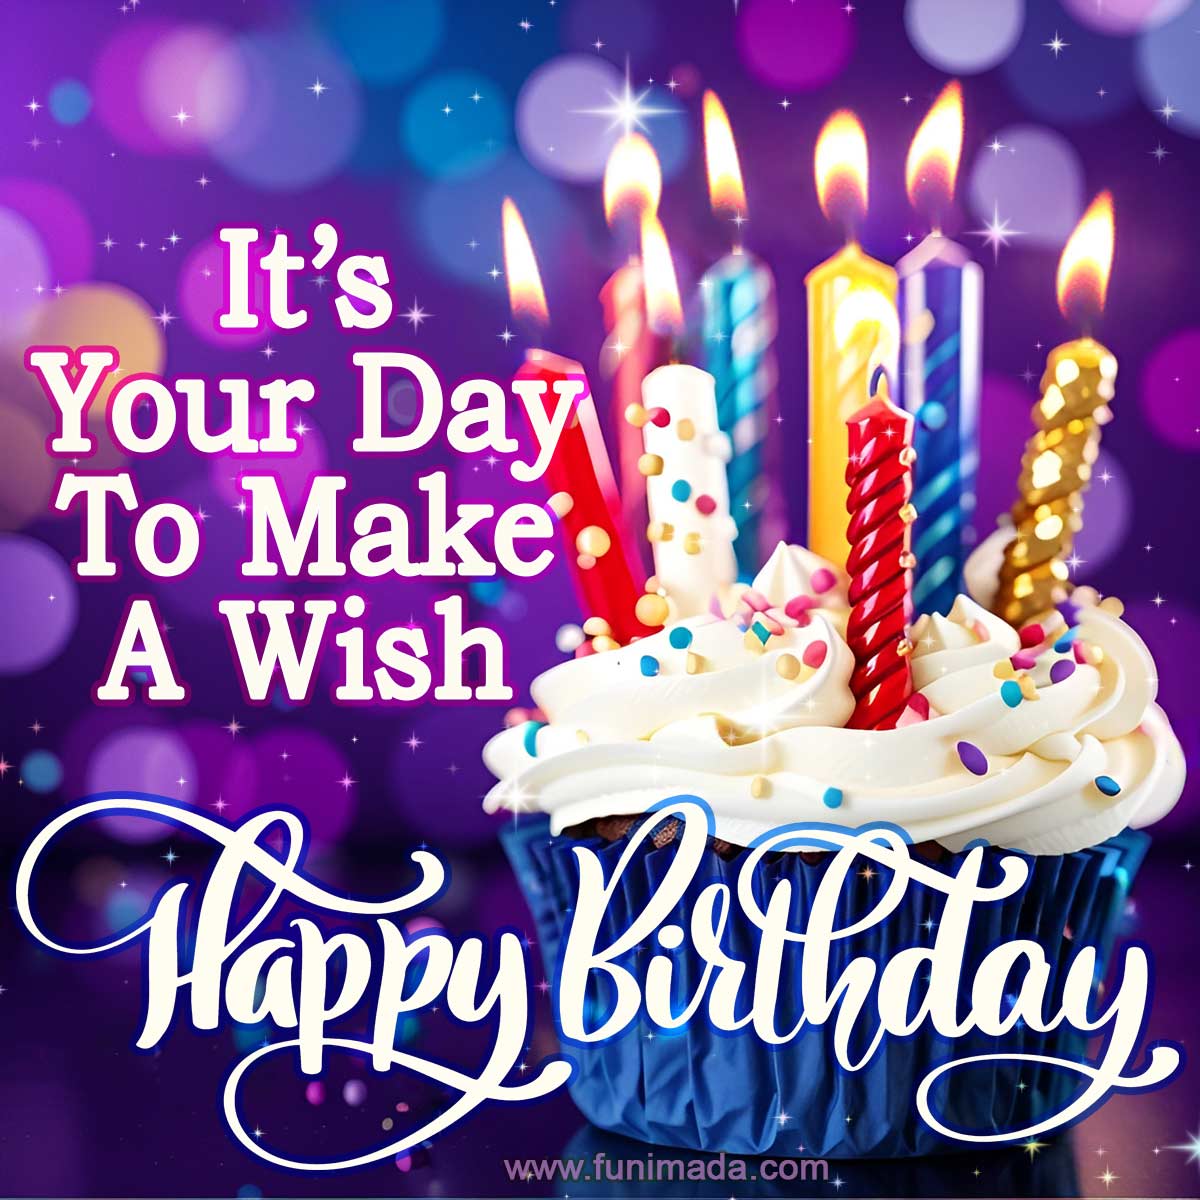 Today's your day to make a wish! Wishing you a happy and wonderful birthday!